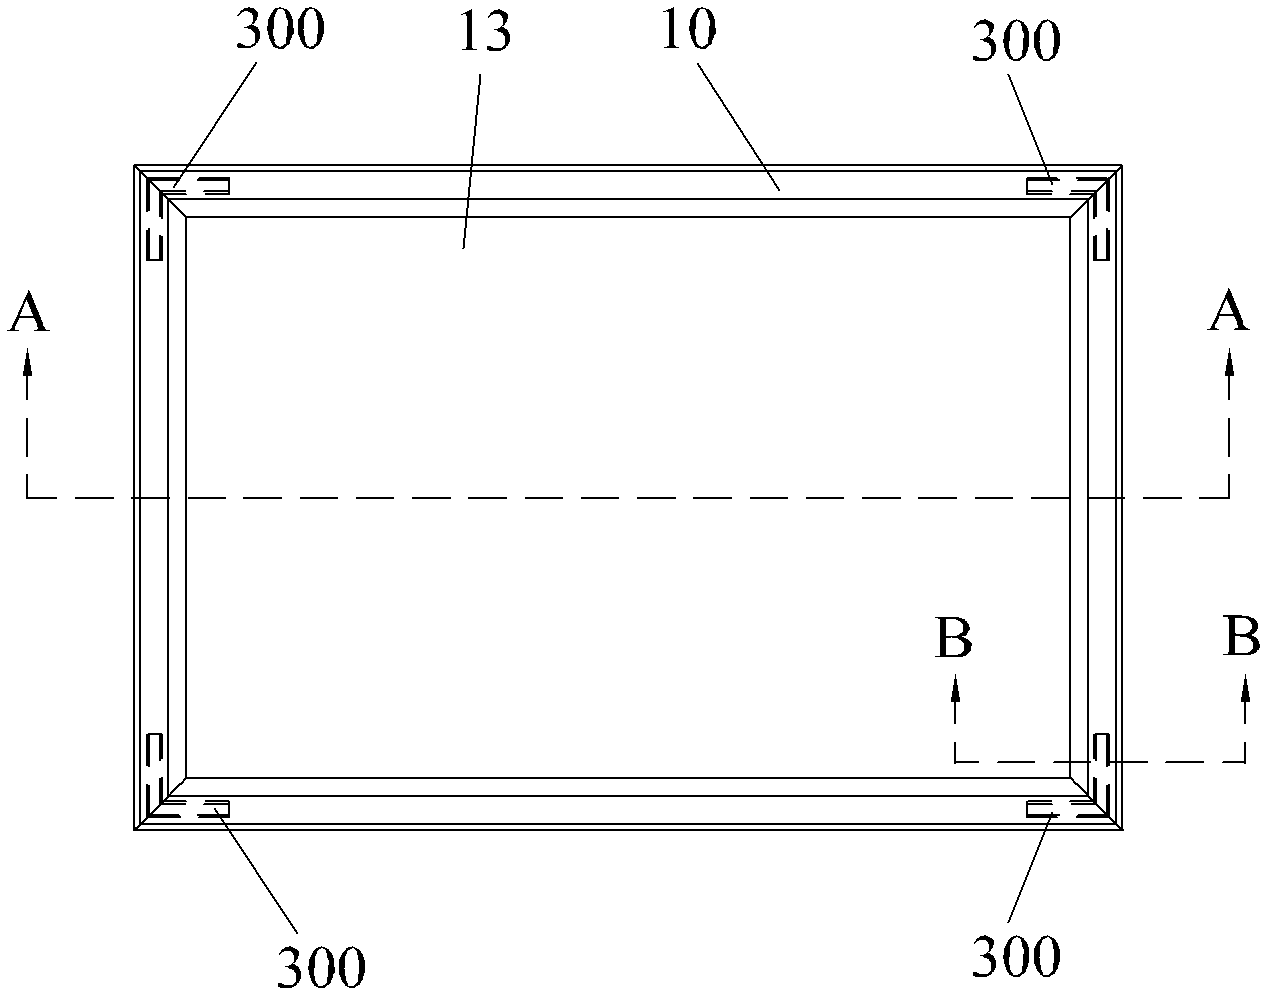 Display with detachable frame